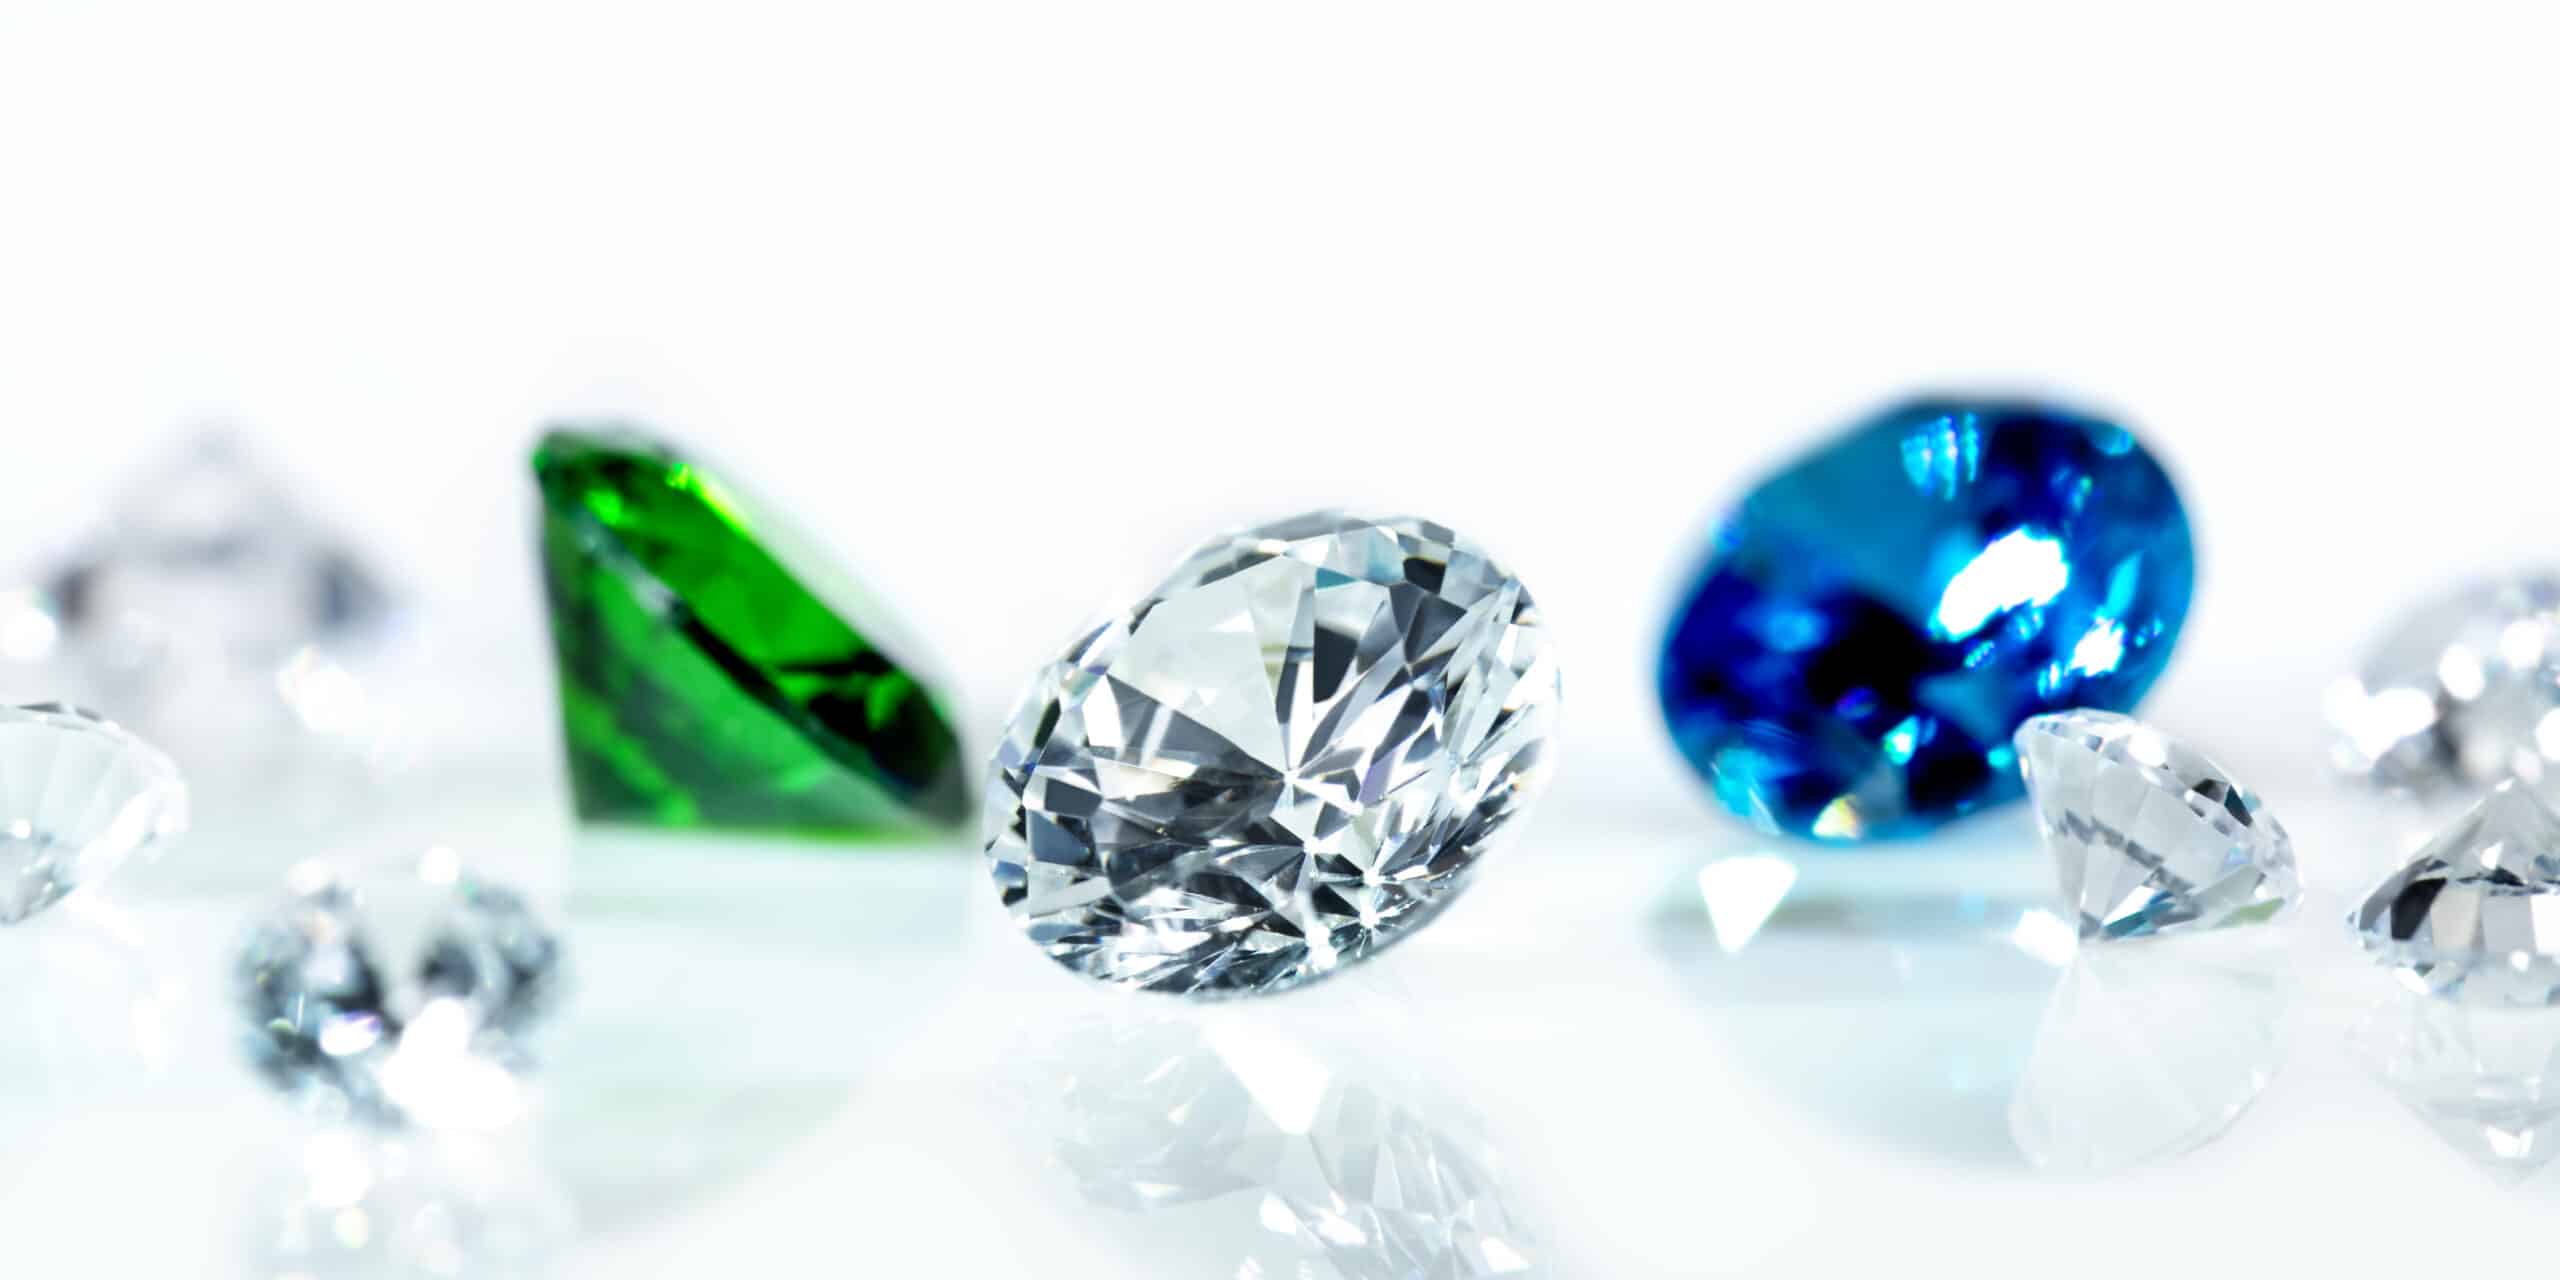 Flawless diamonds, gems, blue sapphire and a green emerald in front of white background